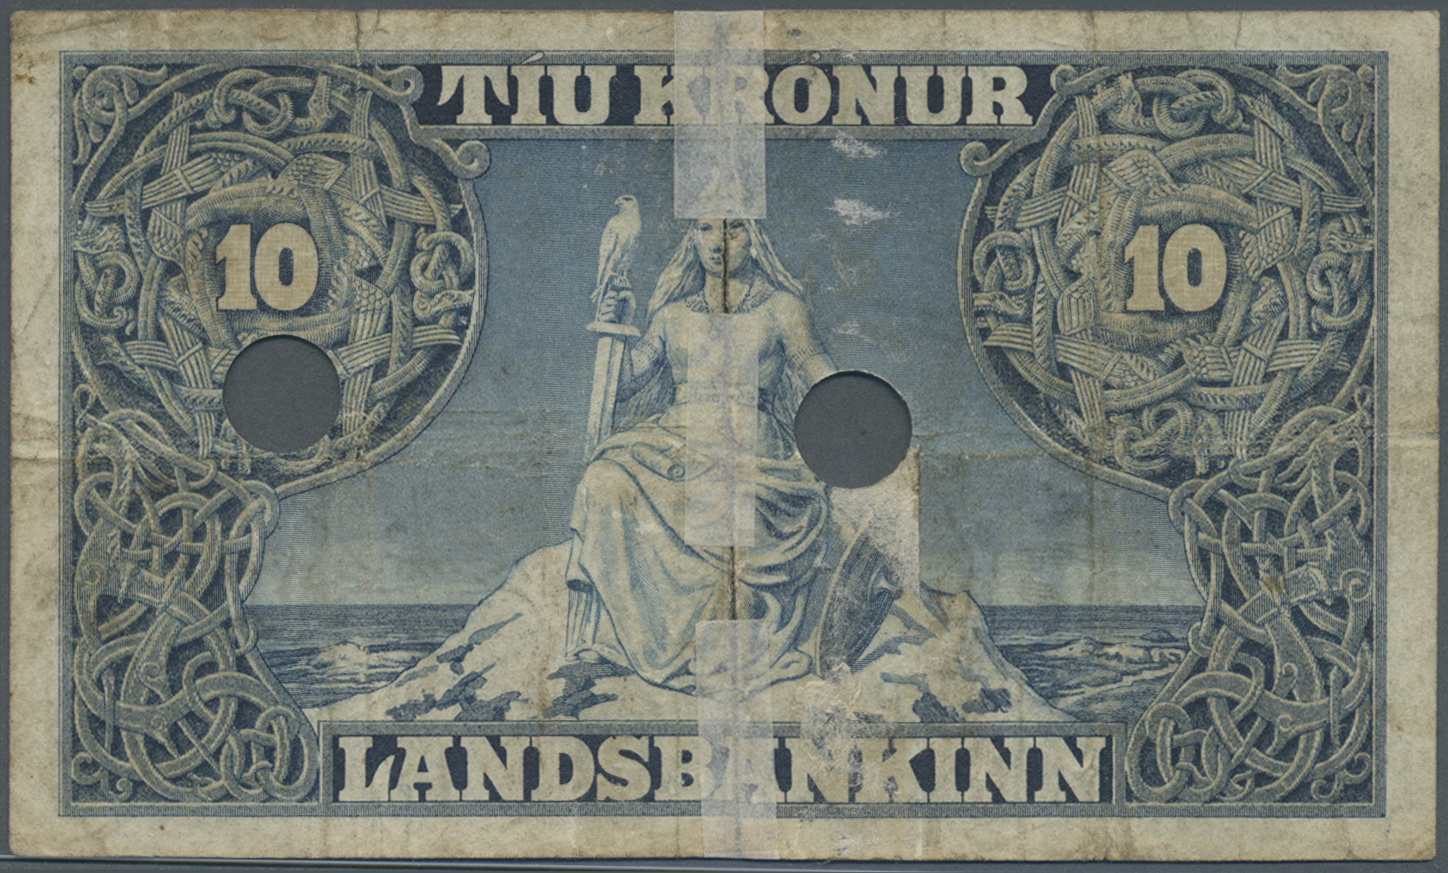 01020 Iceland / Island: 10 Kroner L.1885 (1900) P. 5b, Torn An Taped On Back Side, 2 Cancellation Holes, Stained Paper, - Iceland